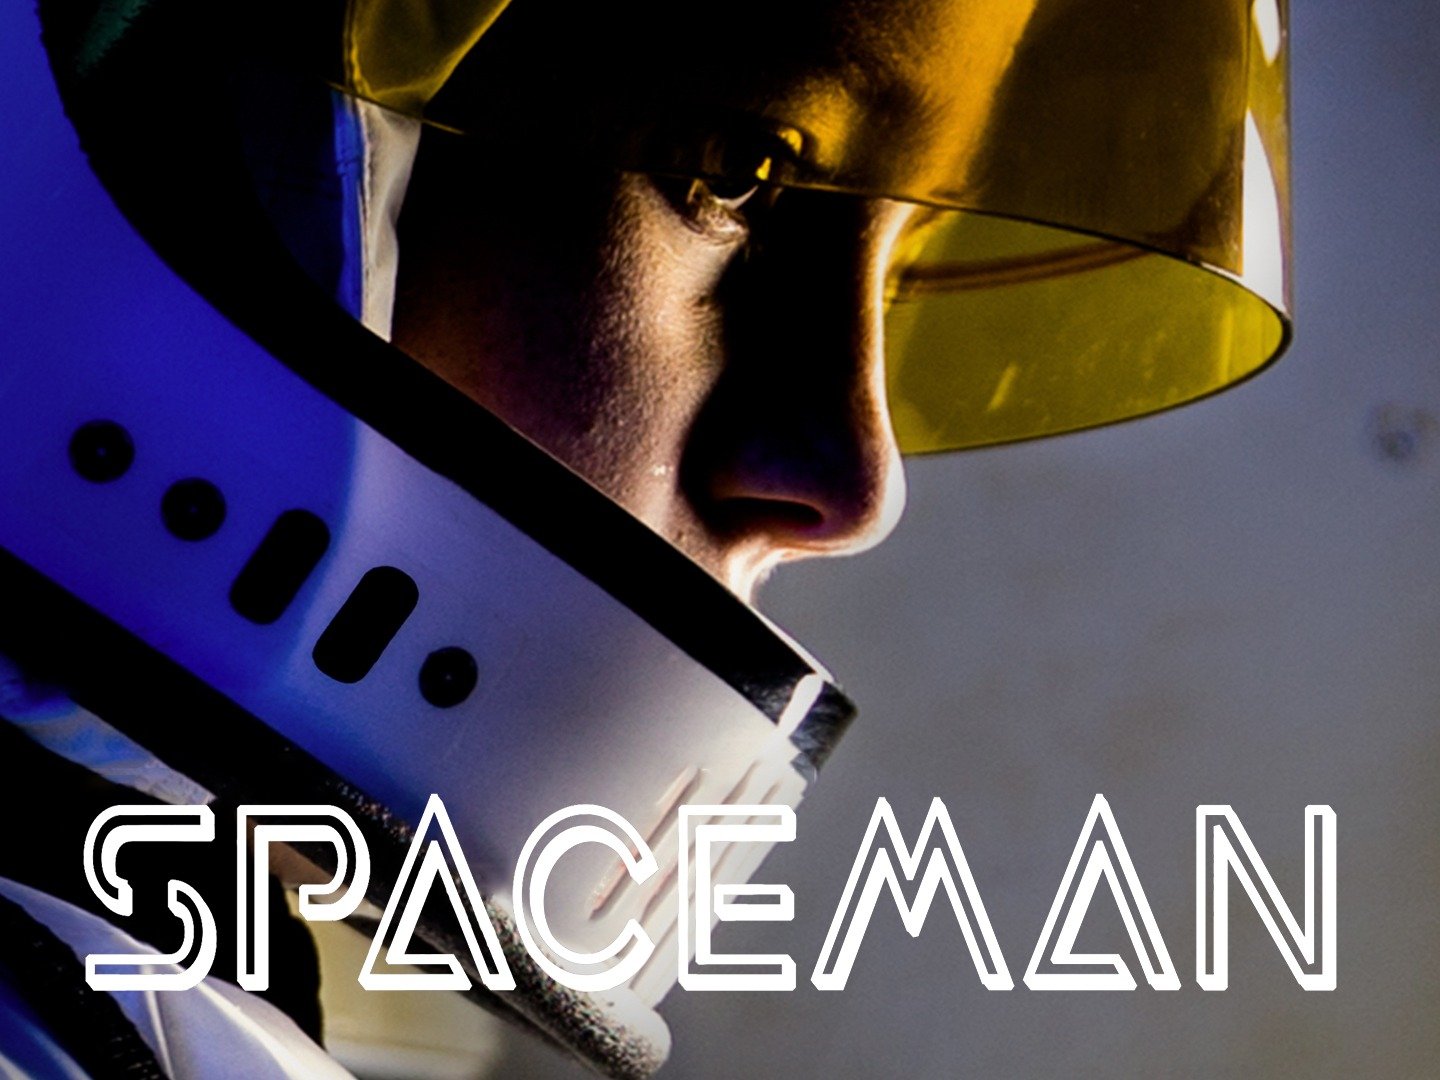 Spaceman - Rotten Tomatoes